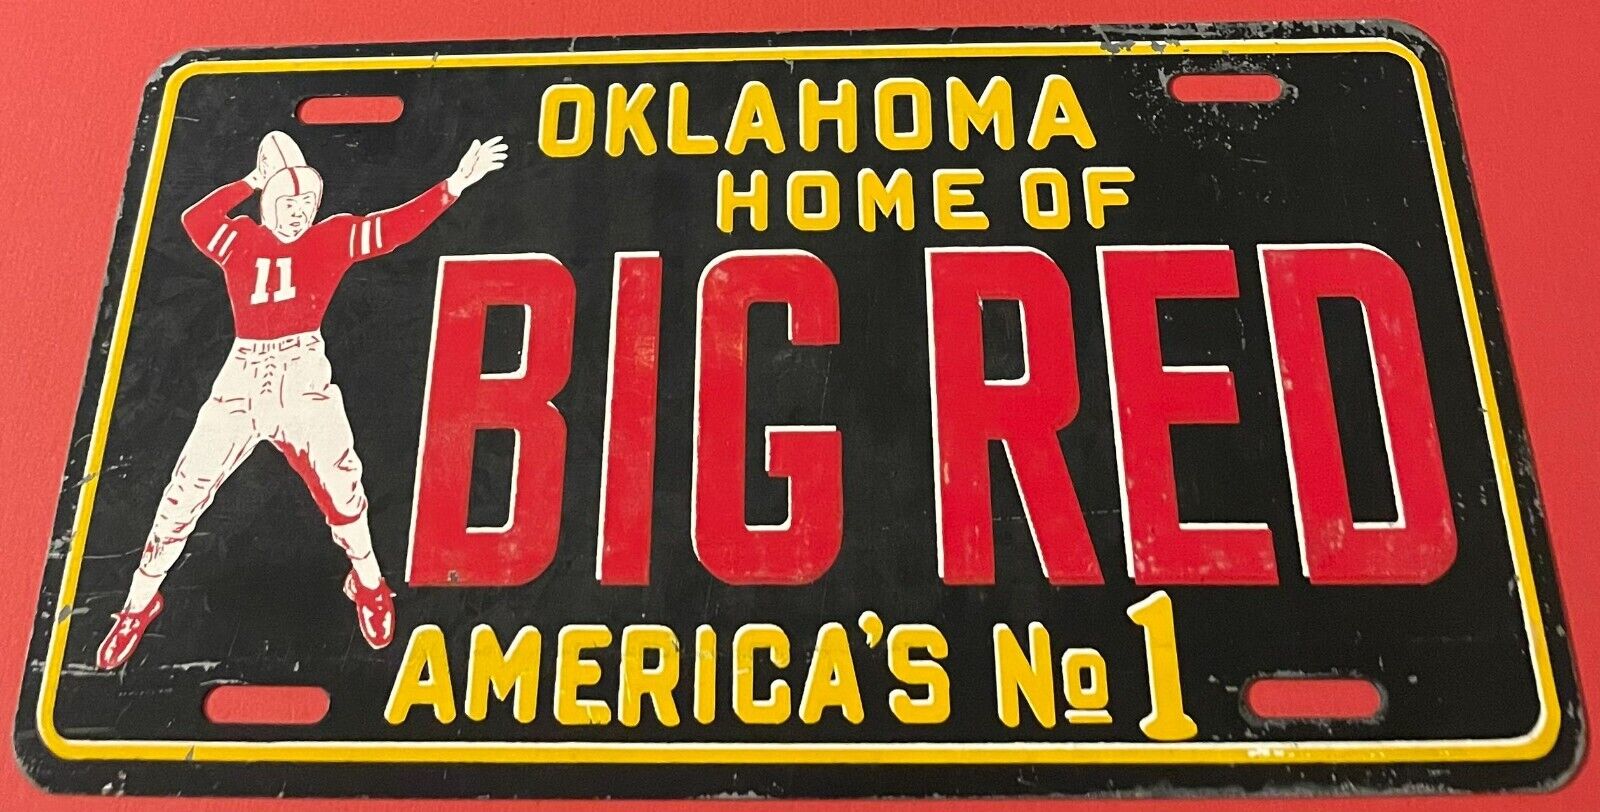 Vintage University of Oklahoma Home of Big Red Booster License Plate STEEL